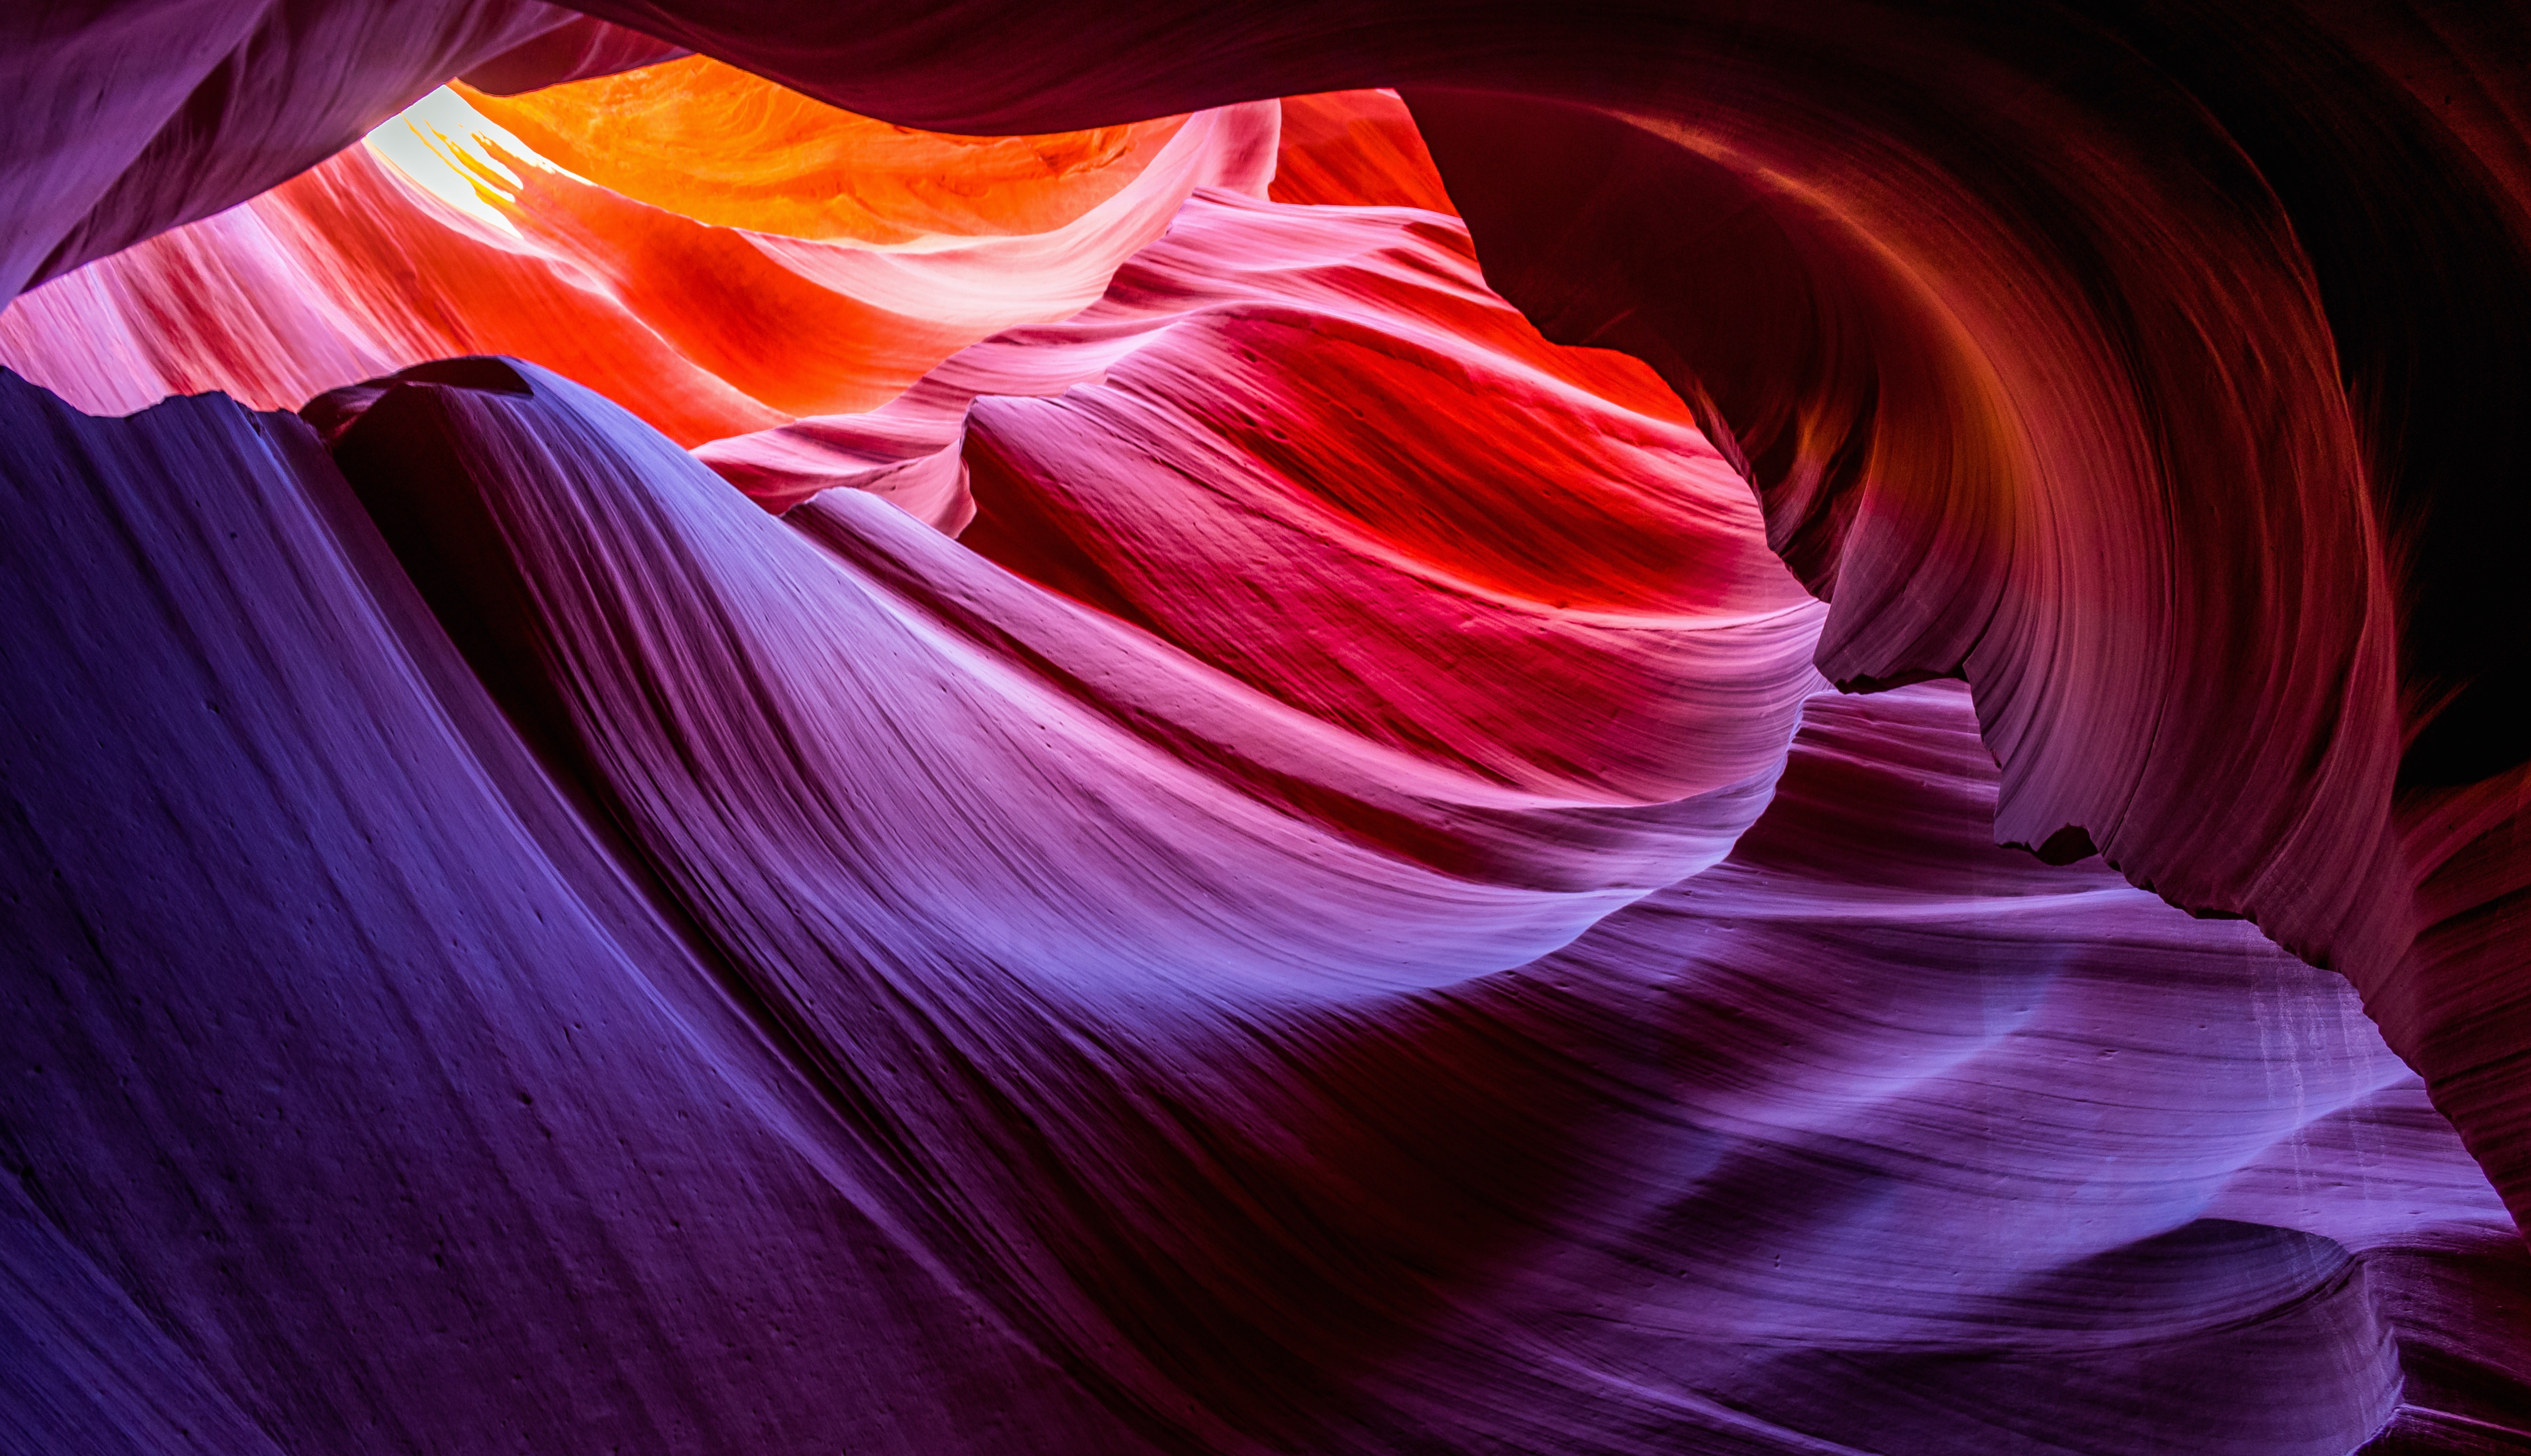 101622 download wallpaper nature, canyon, layers, slit, arizona, slots, sandy cliffs, sand cliffs, antelope canyon screensavers and pictures for free